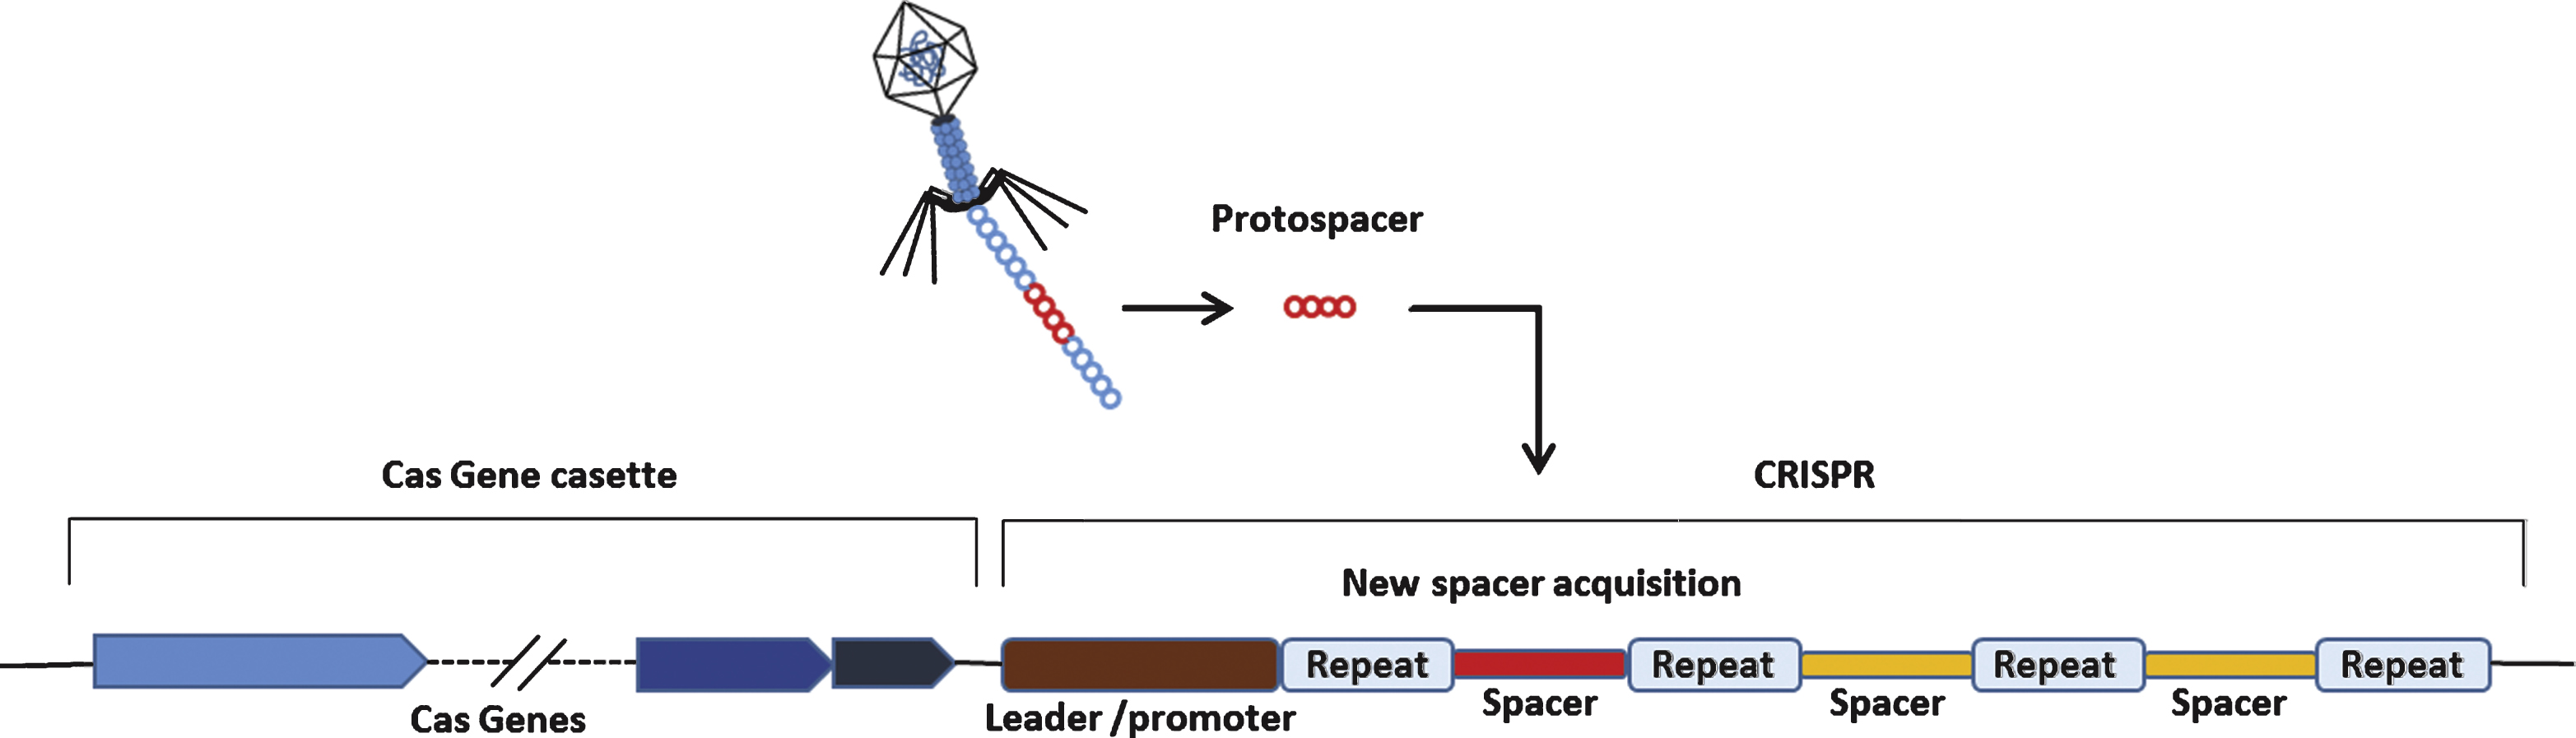 Schmatics of a generalized CRISPR locus. Upon introduction of foreign genetic elements from bacteriophages or plasmids, Cas proteins obtain spacers from the exogenous protospacer sequences and they are incorporated into the CRISPR locus of host genome.